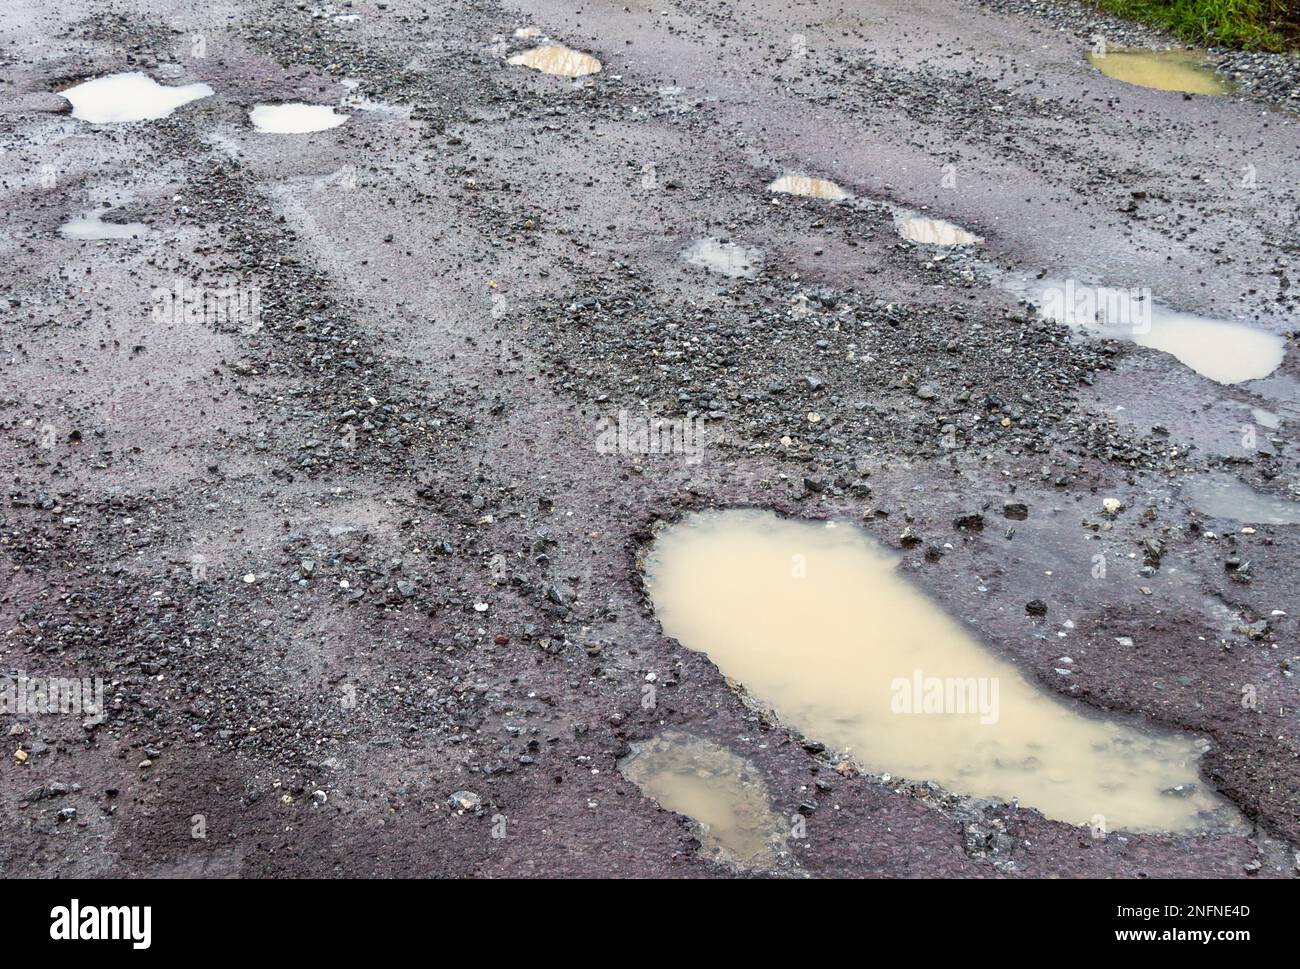 Potholes in road surface breaking up tarmac caused by winter frost and ice Stock Photo